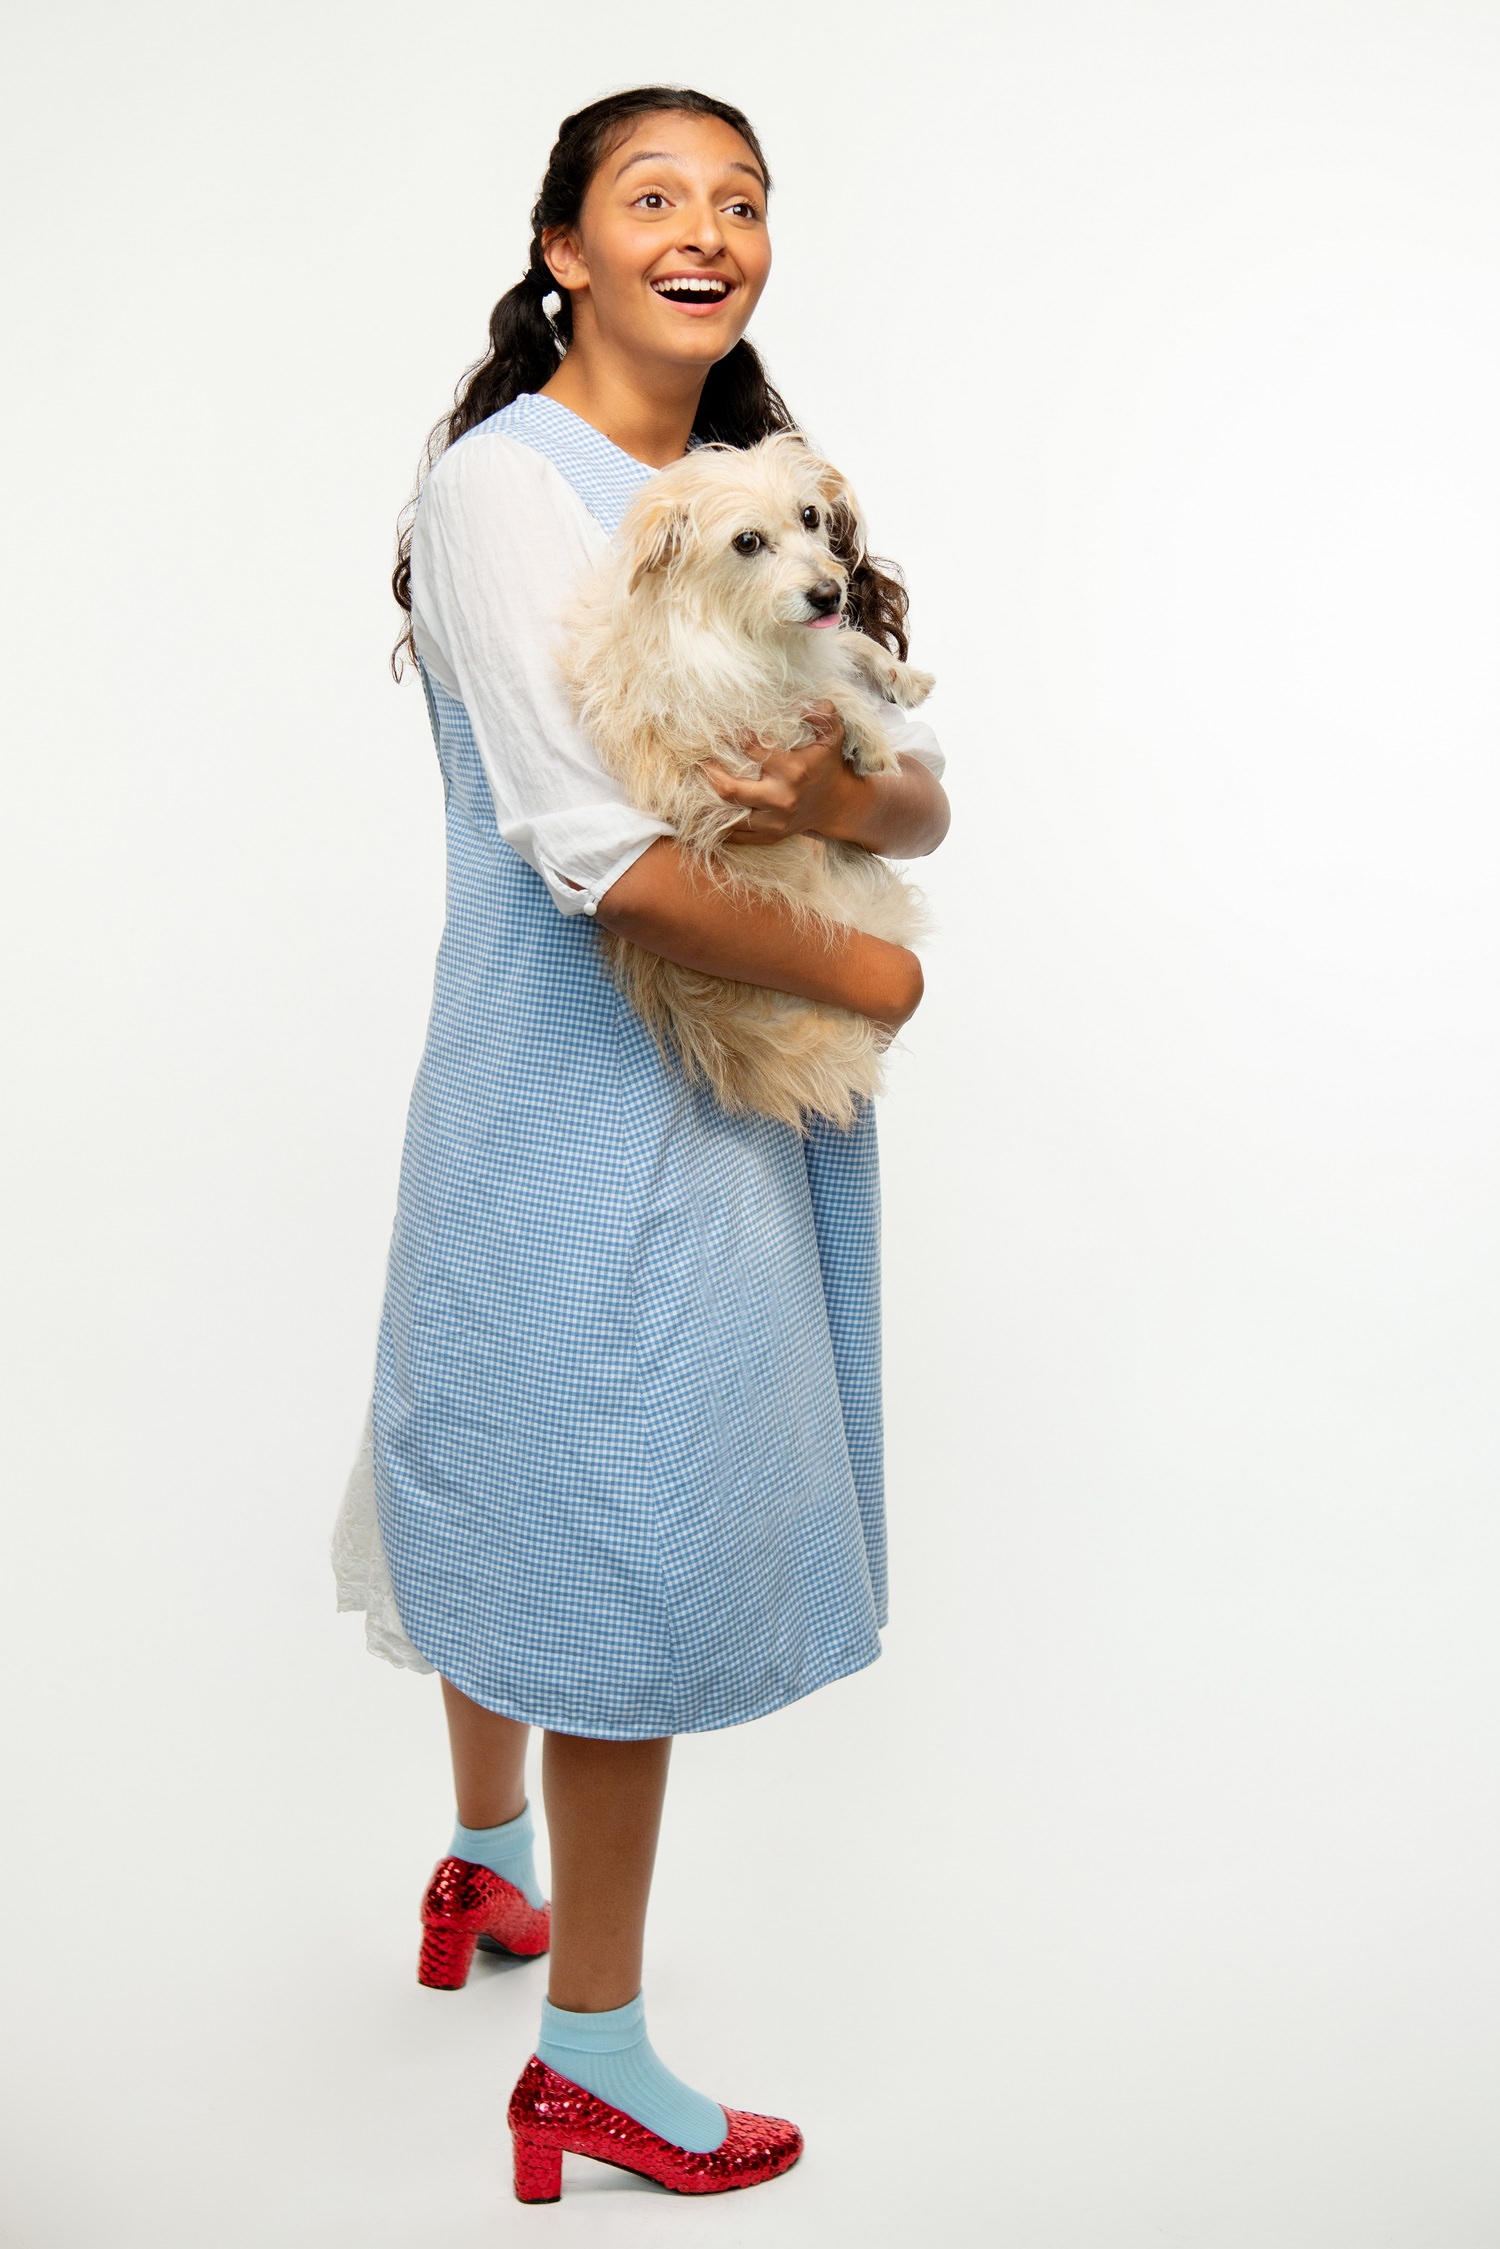 Dorothy (Shayla Lawler) poses in Berkeley Playhouse's production of The Wizard of Oz, directed by Lexie Lazear. Performing at the Julia Morgan Theater from November 9 to December 23.